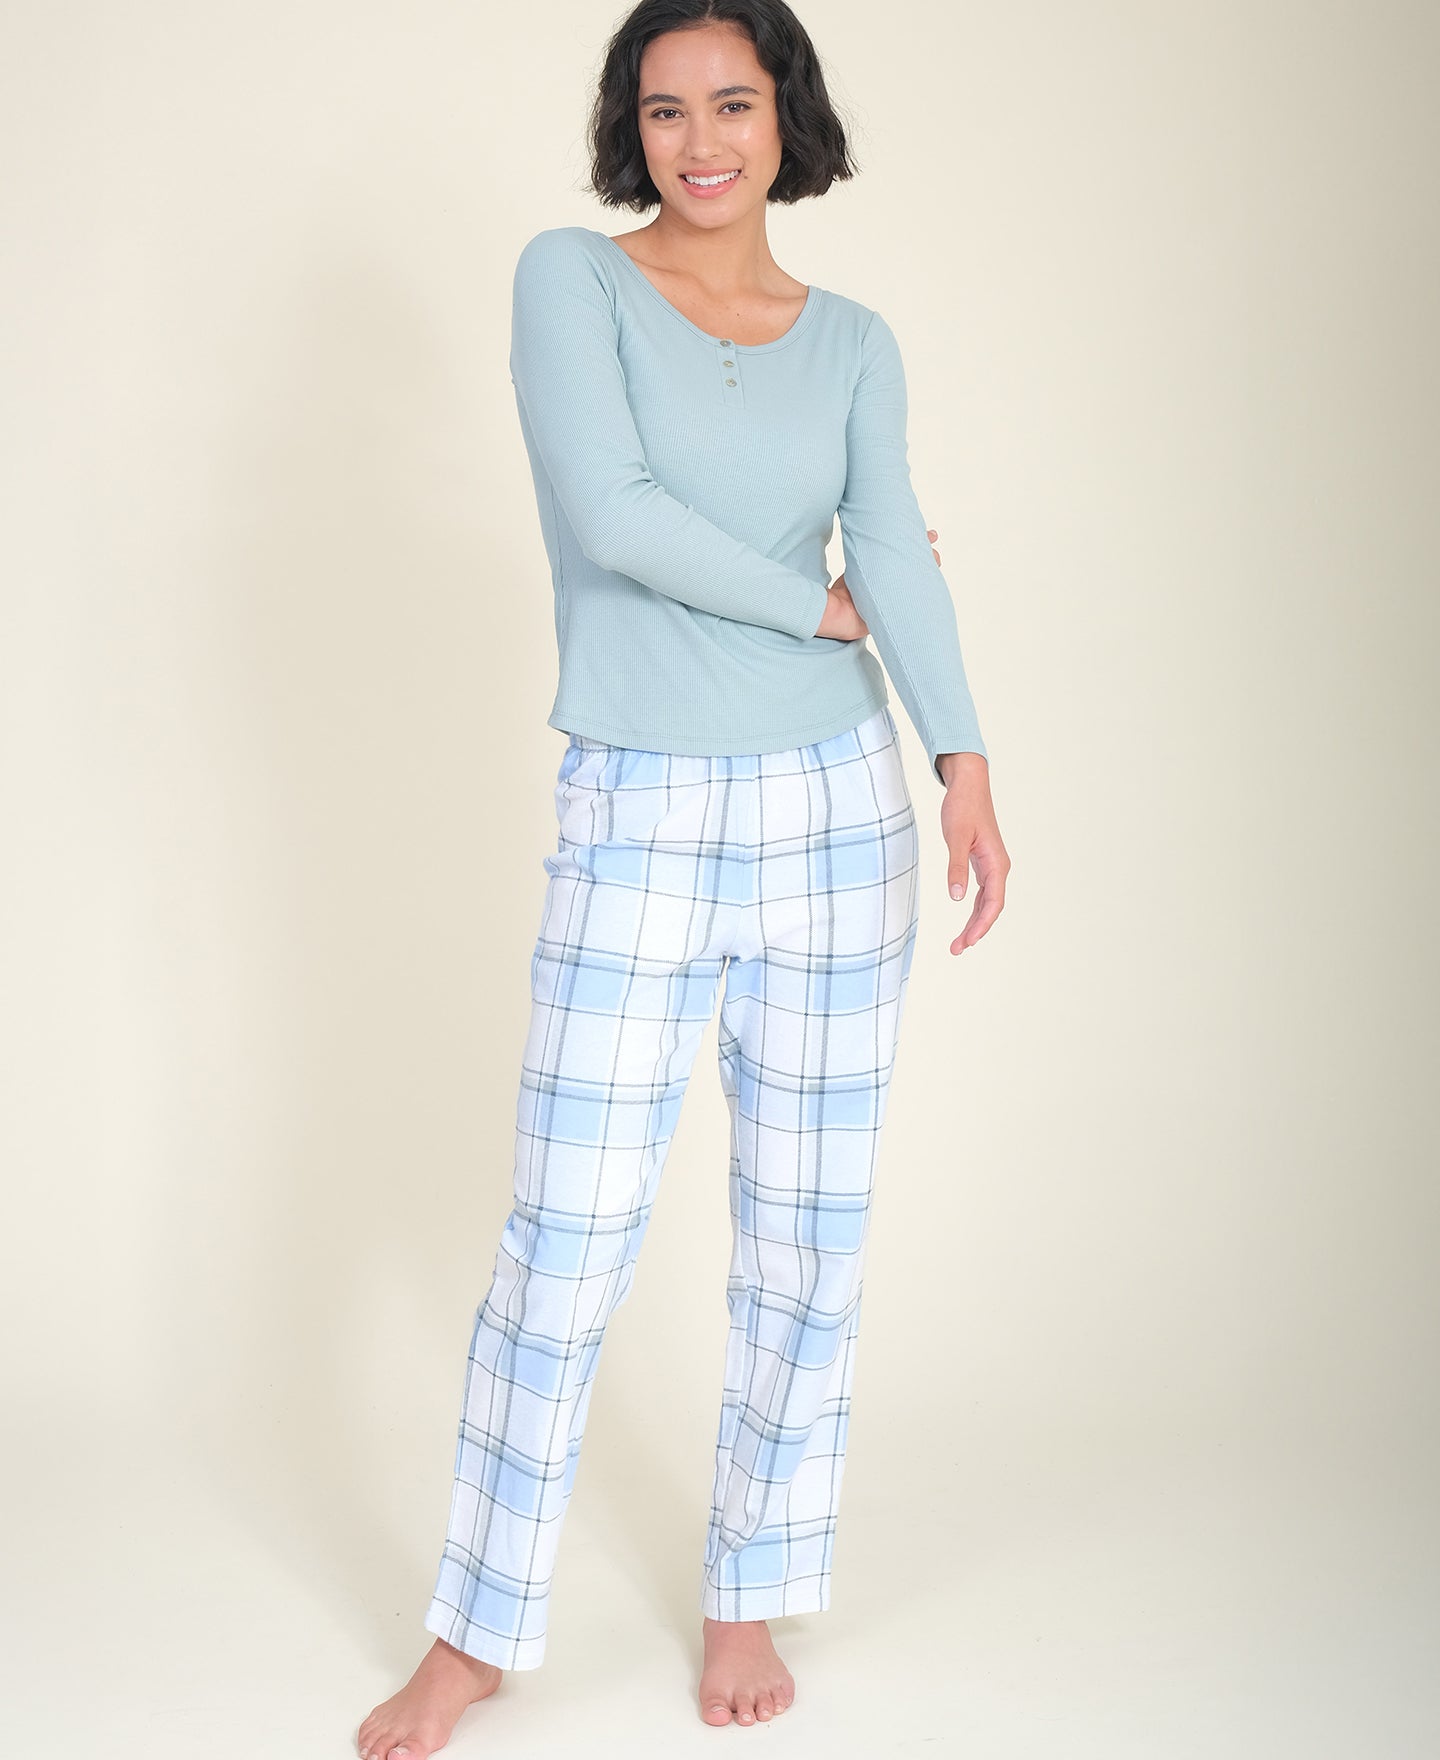 Women's Royal/Silver Plaid Pajama Pants – Colby-Sawyer Campus Store